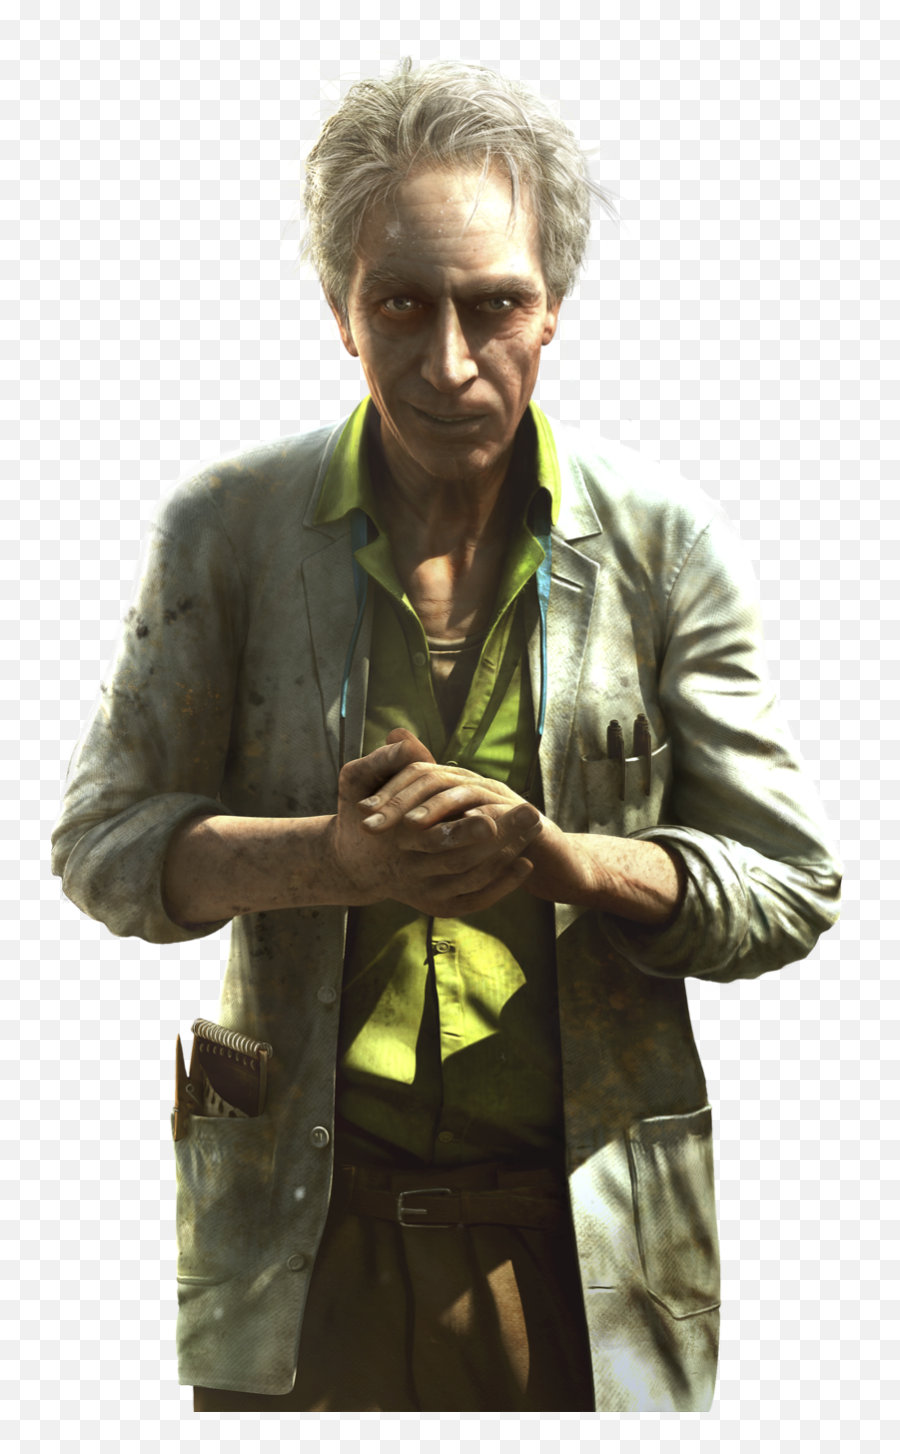 Download Free Png Far Cry Hd - Dlpngcom Far Cry 3 Doctor,Cry Png